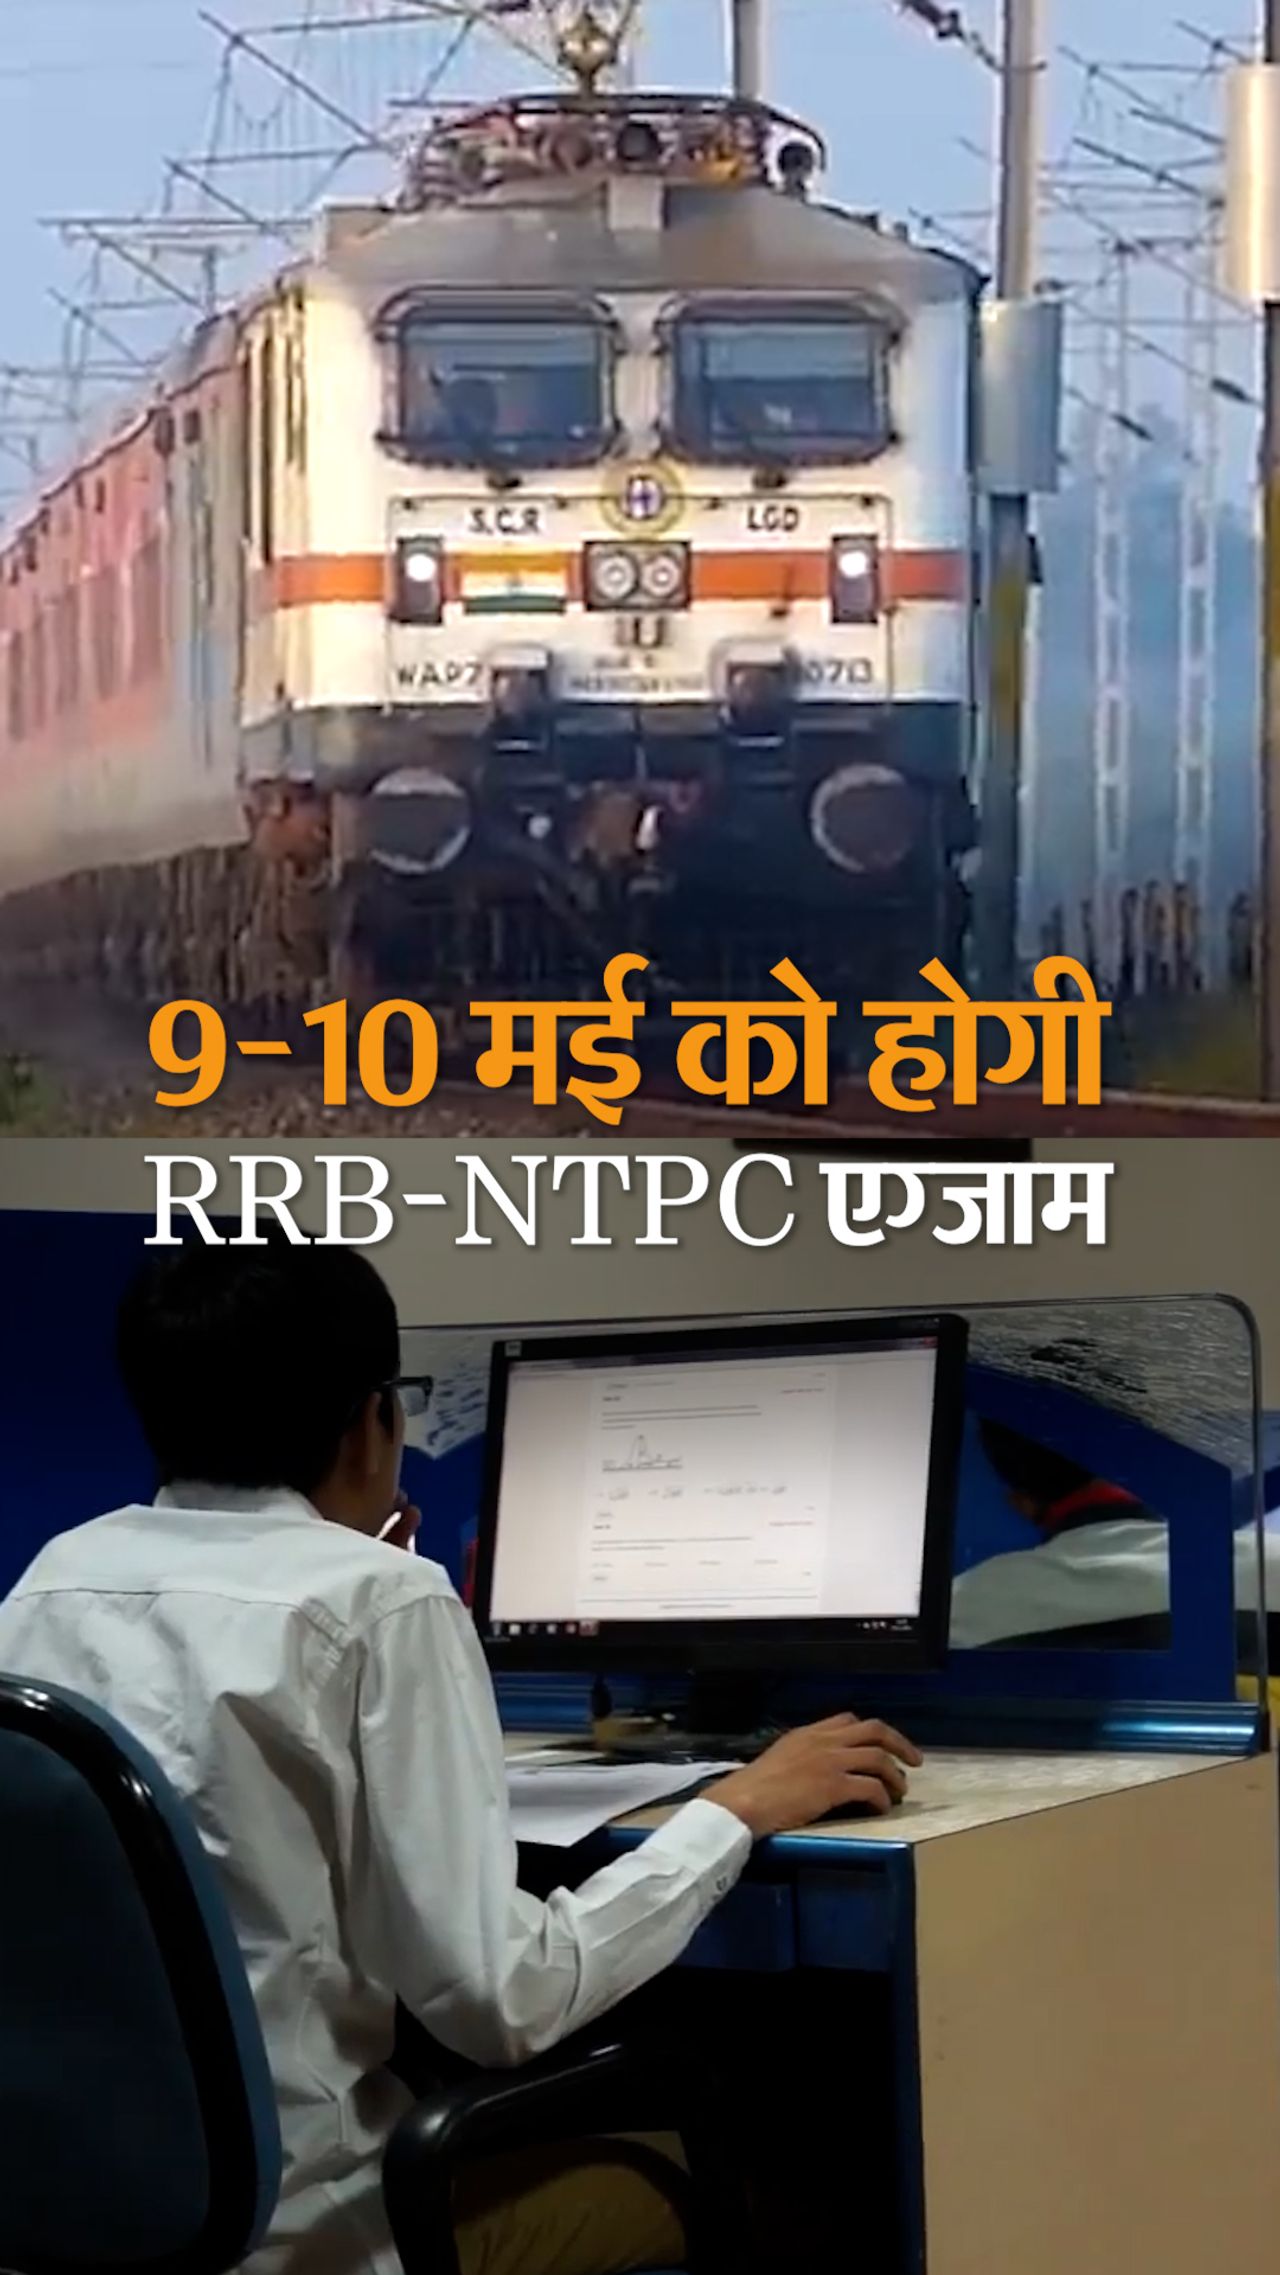 RRB NTPC Phase II (CBT-2) exam will be held on May 9 and 10